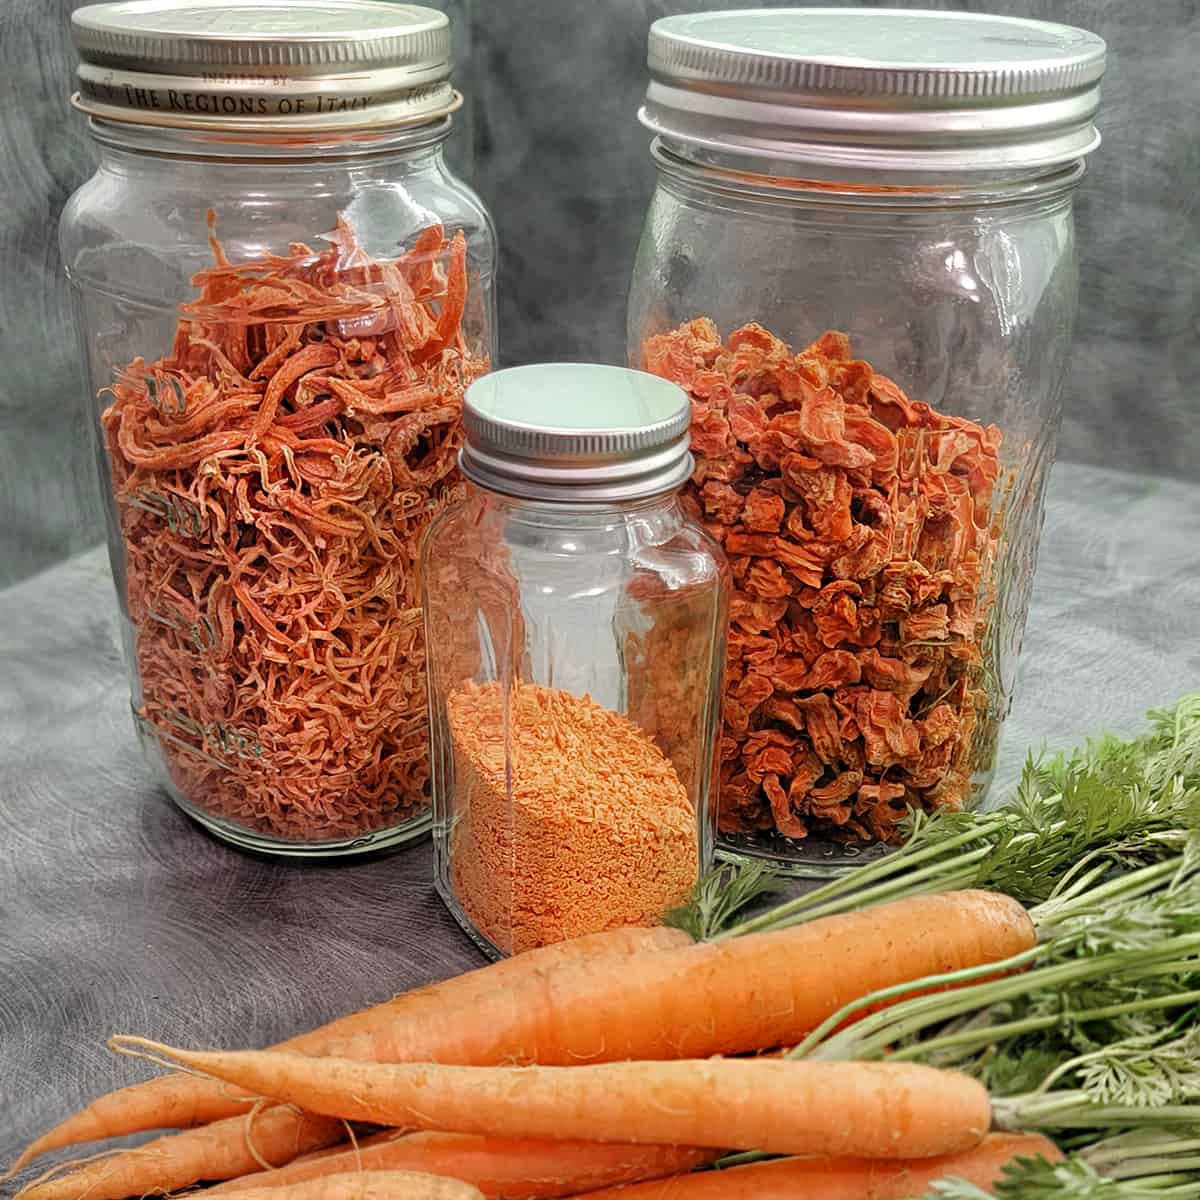 How do shred baby carrots with out shredding your fingers